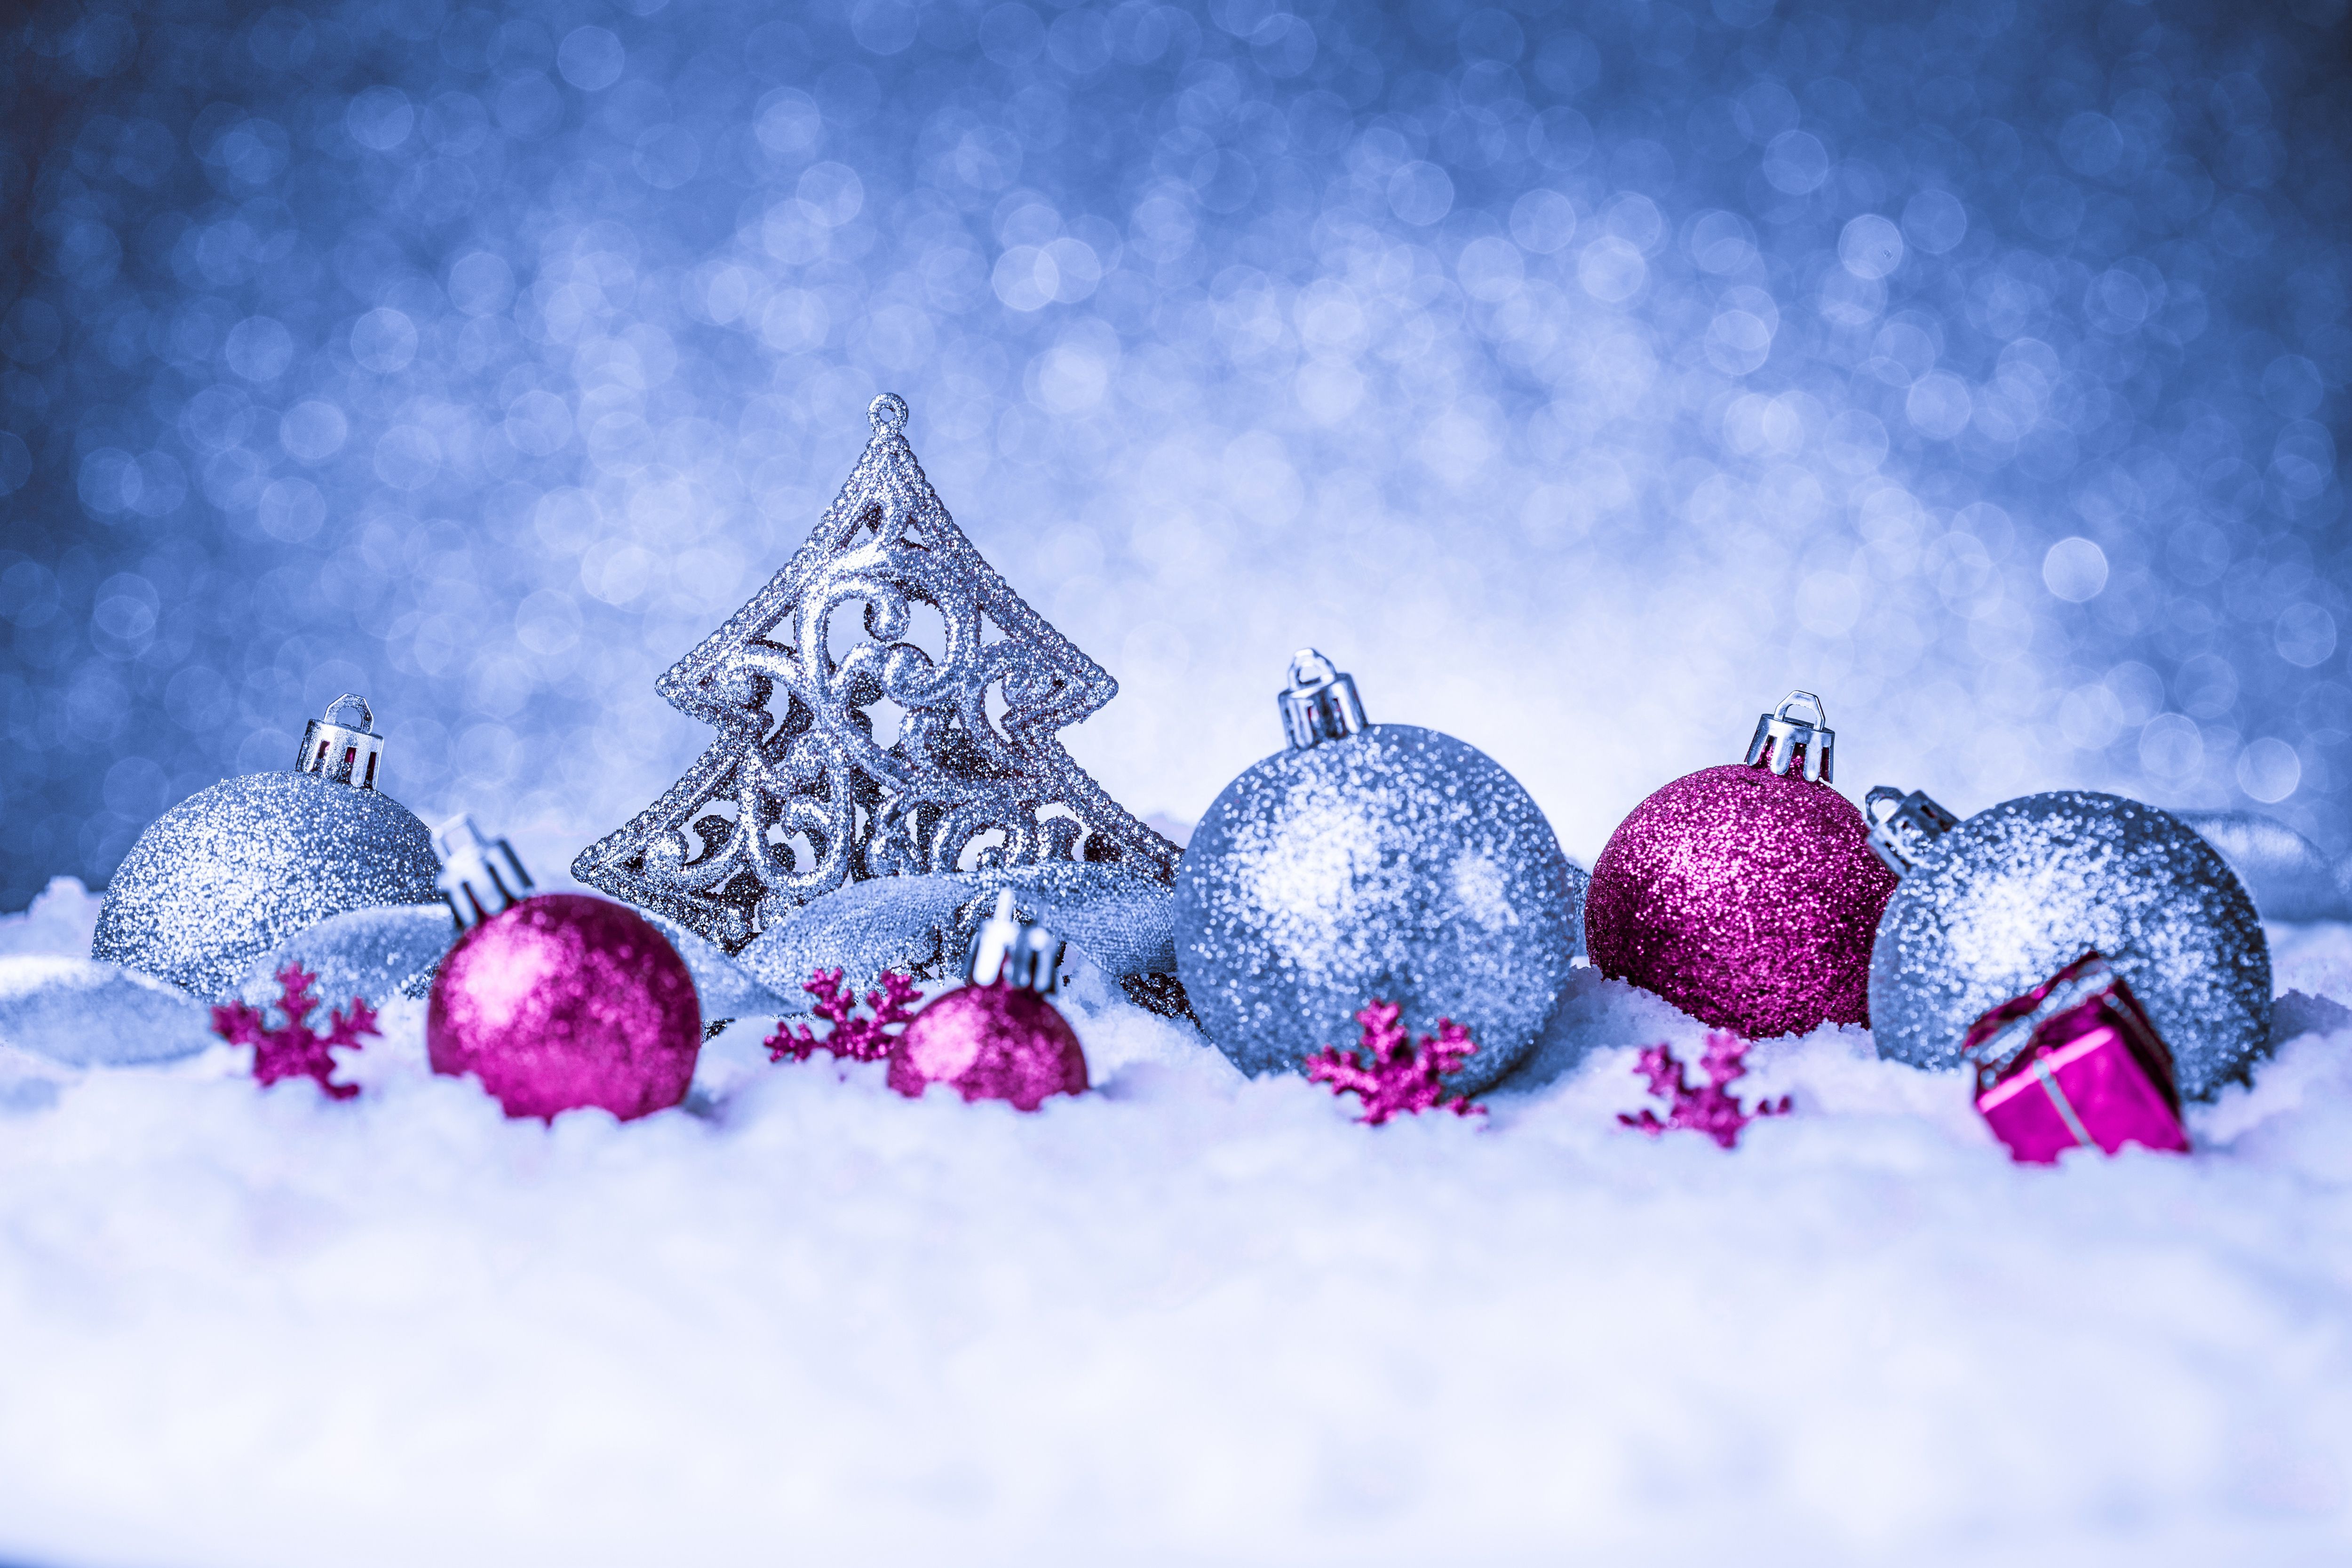 Blue Christmas Background With Pink Ornaments Quality Image. Christmas Desktop Wallpaper, Christmas Desktop, Christmas Background